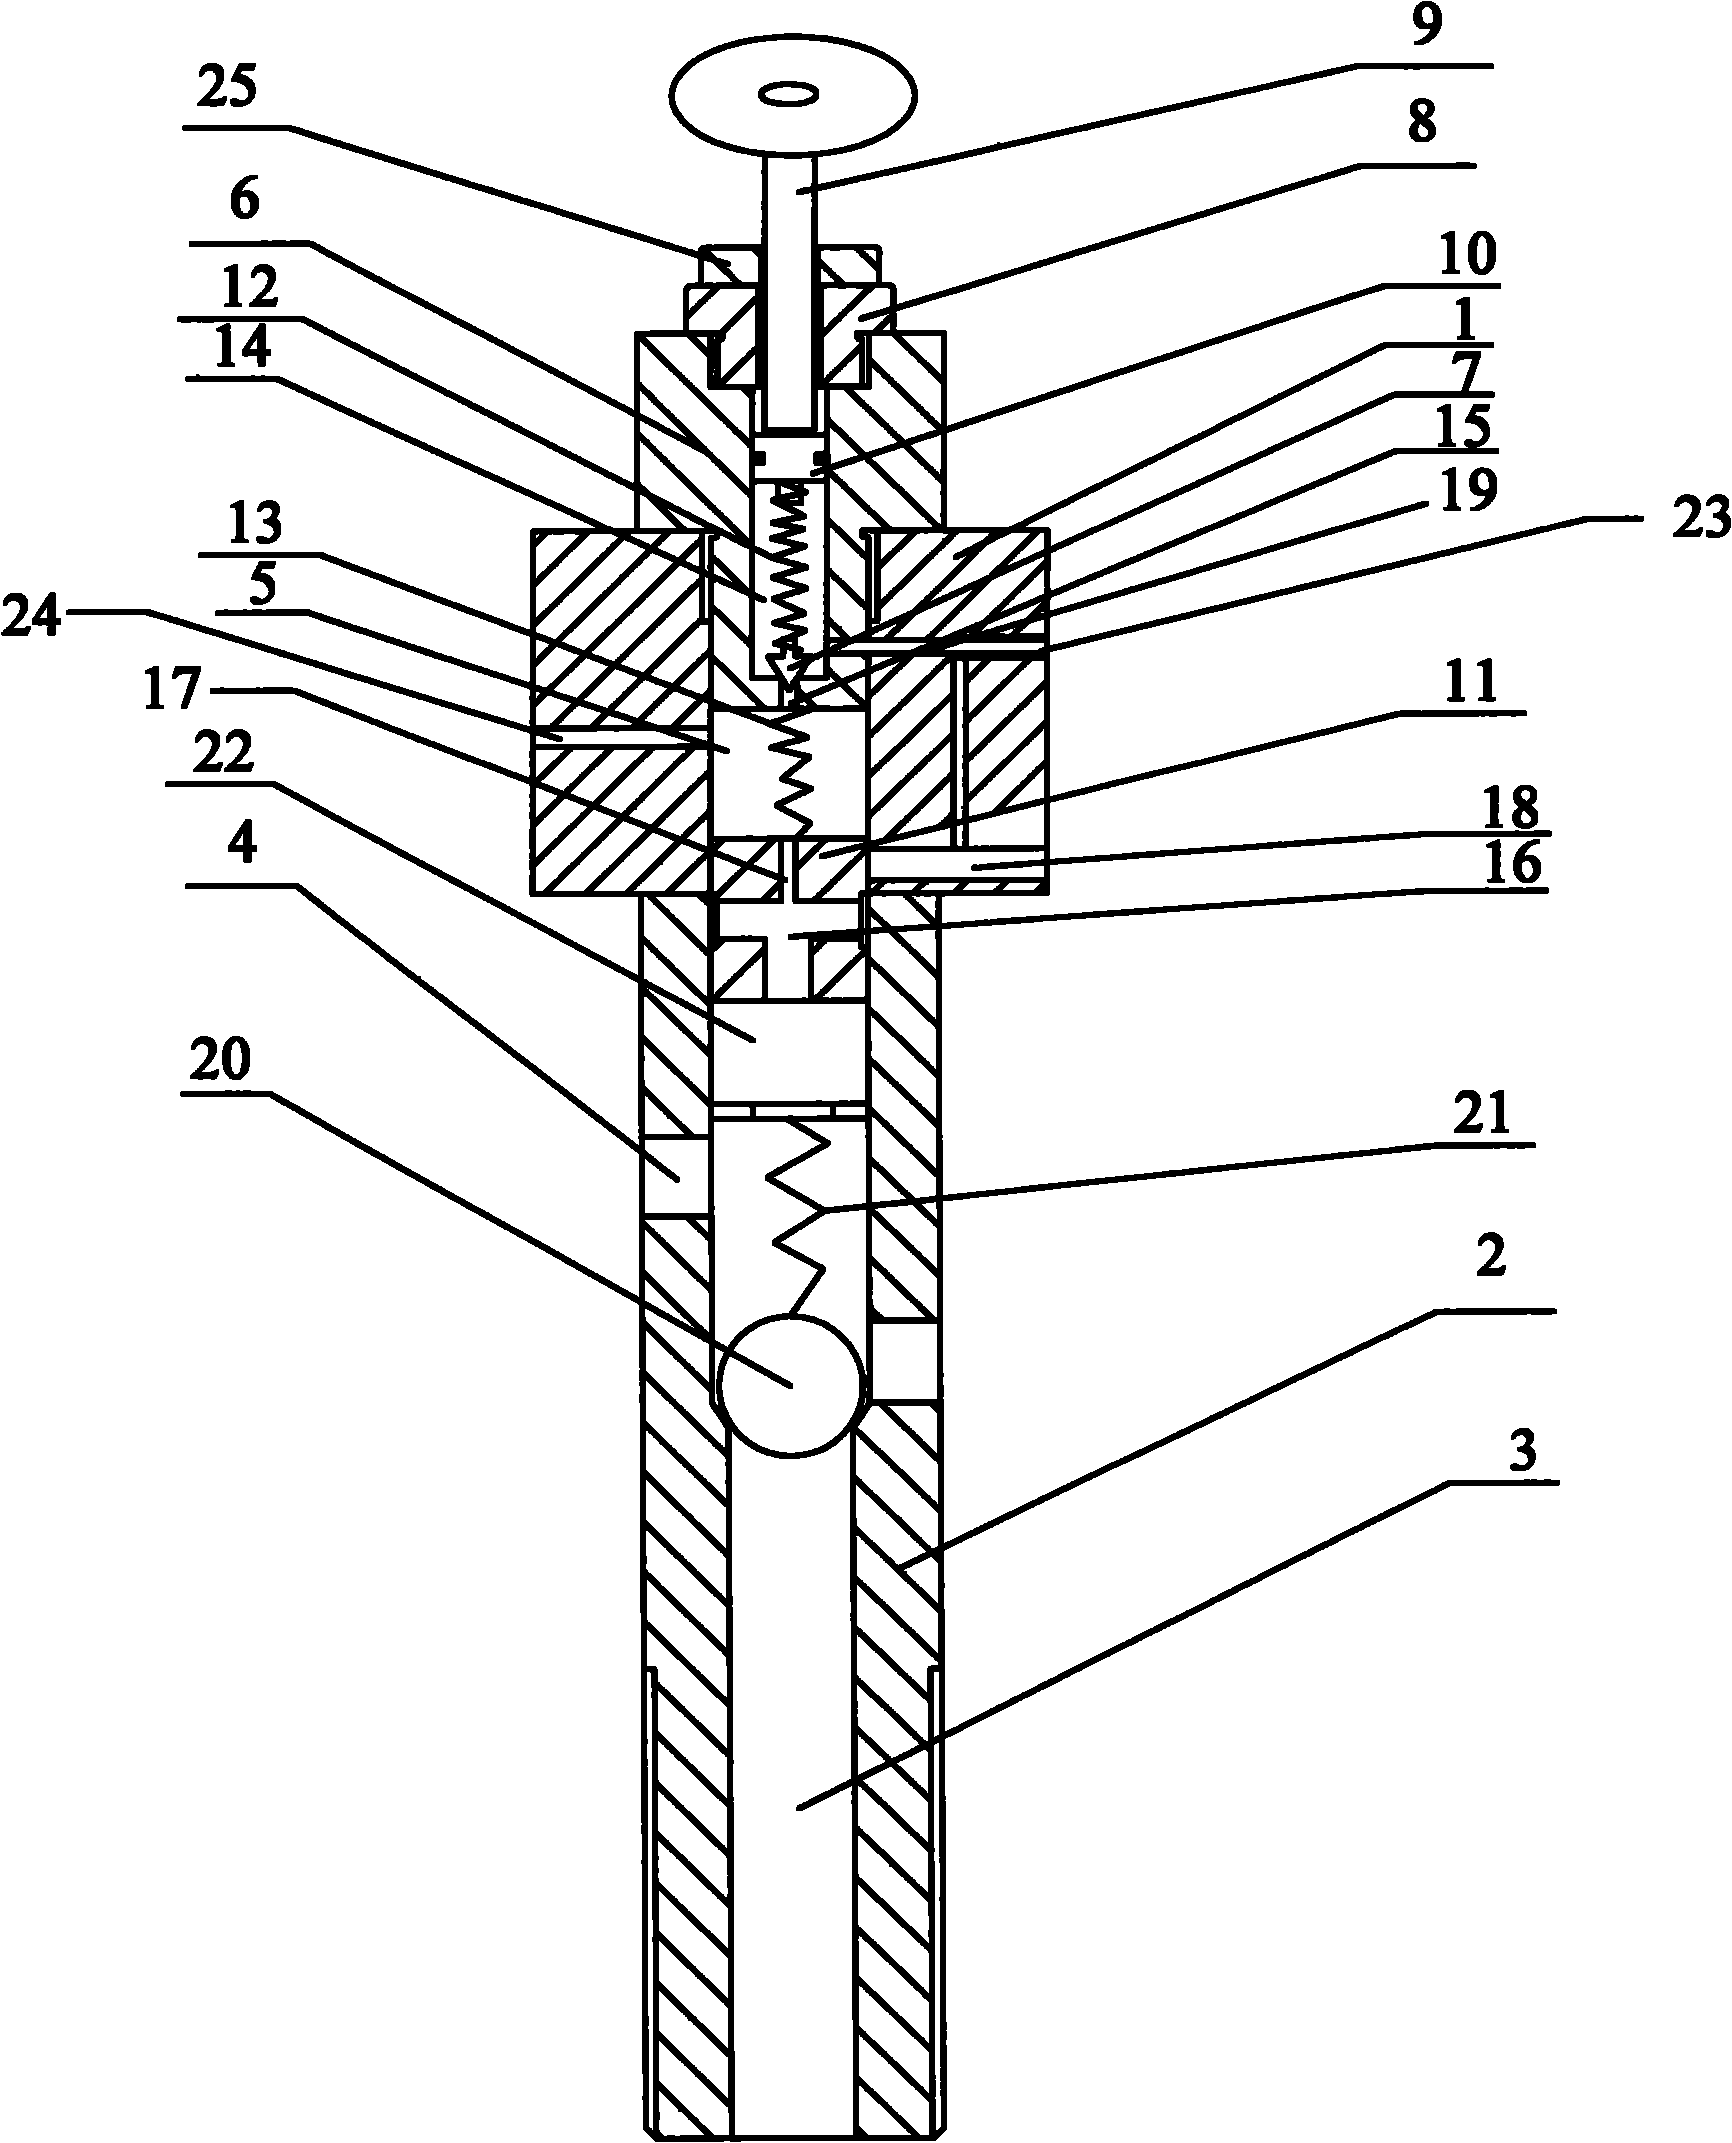 Link bolt capable of maintaining stable internal hydraulic pressure